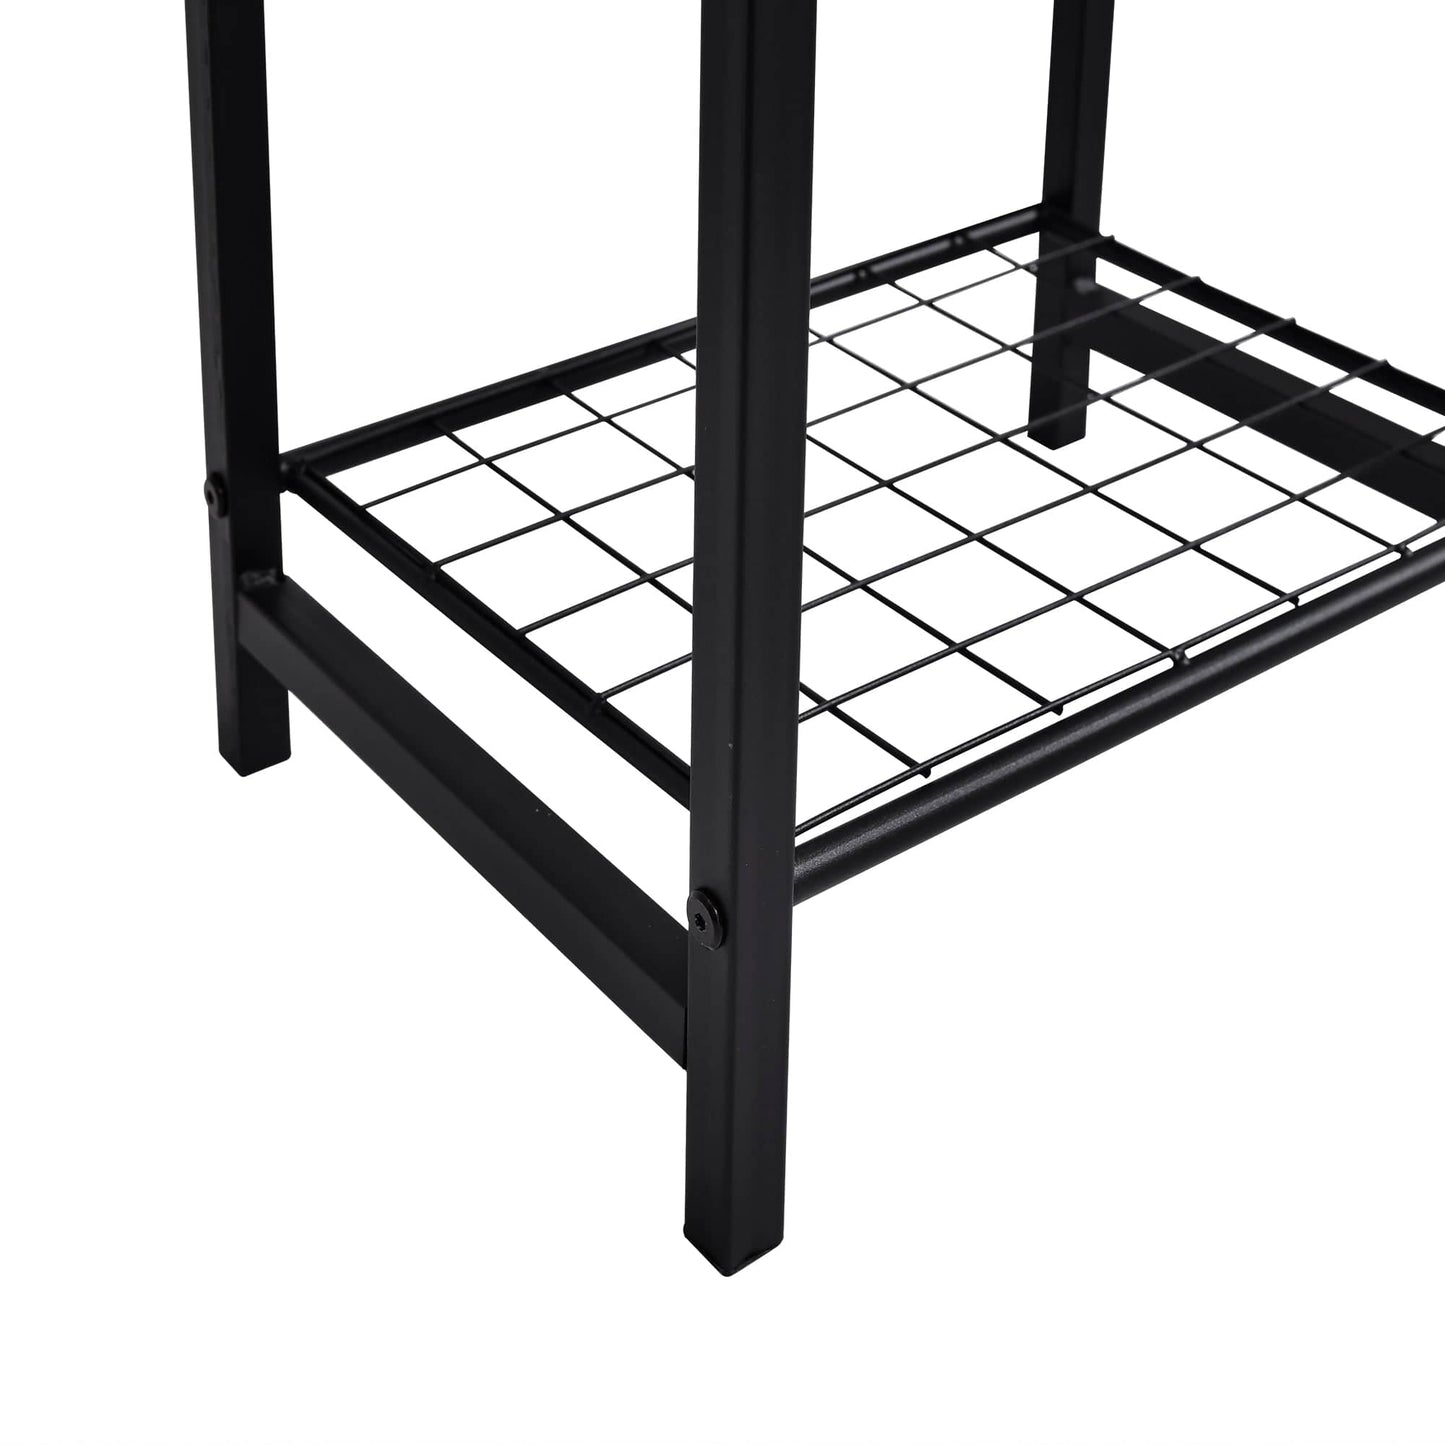 2-Tier End Table, Industrial Side Table Nightstand with Durable Metal Frame, Coffee Table with Mesh Shelves for Living Room，OAK Finish - HomeRelaxOfficial